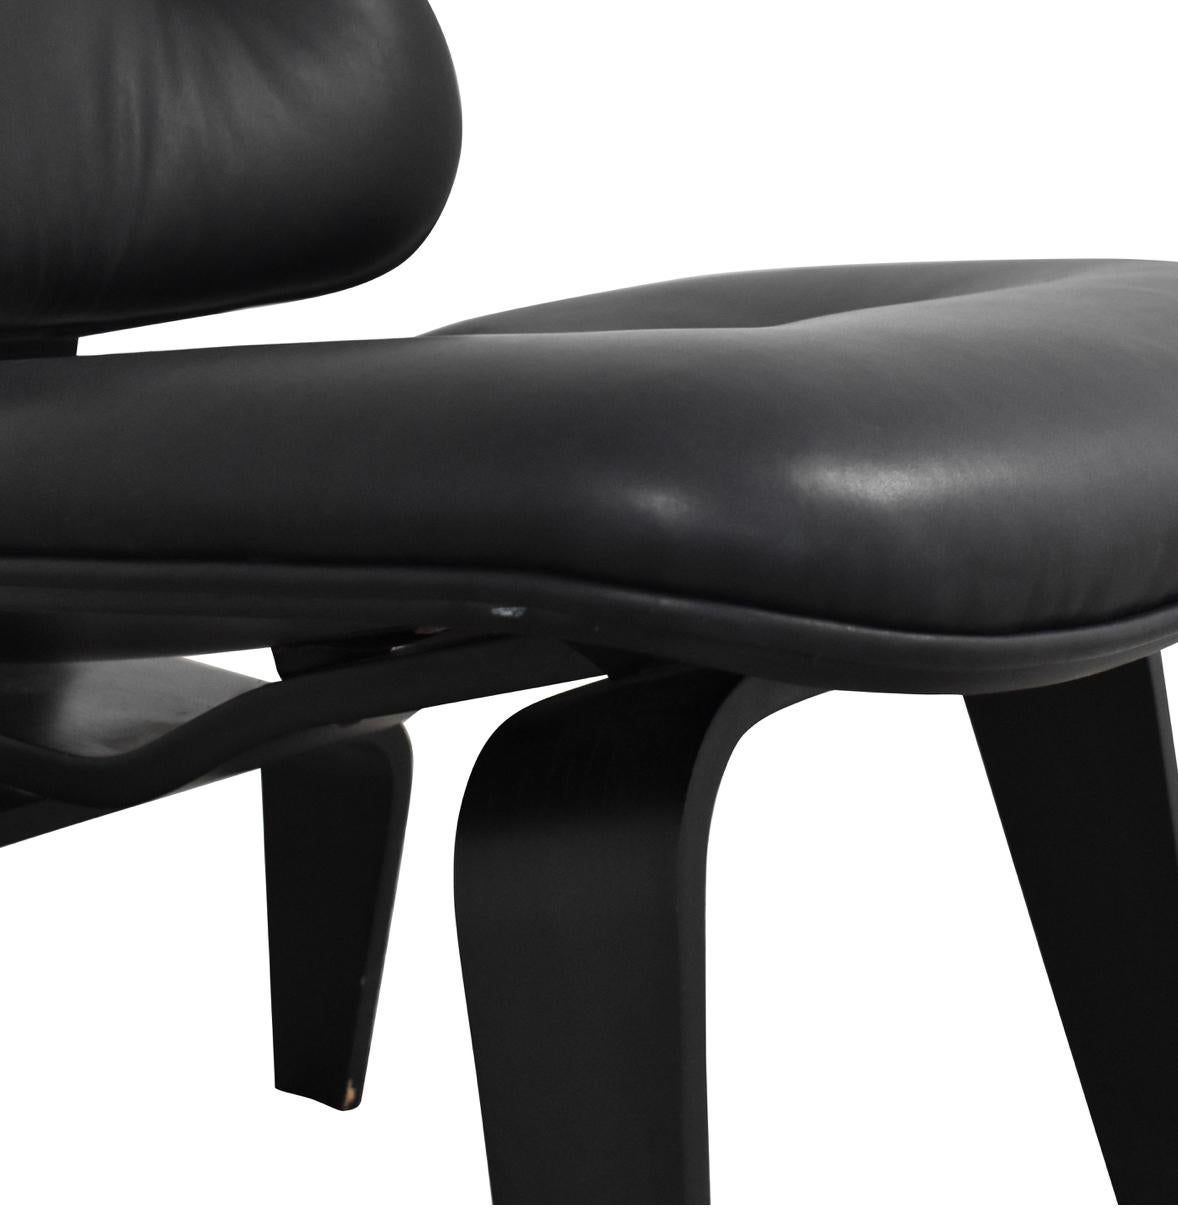 American Charles, Ray Eames Molded Plywood Chair, Black Birch and Leather, Herman Miller